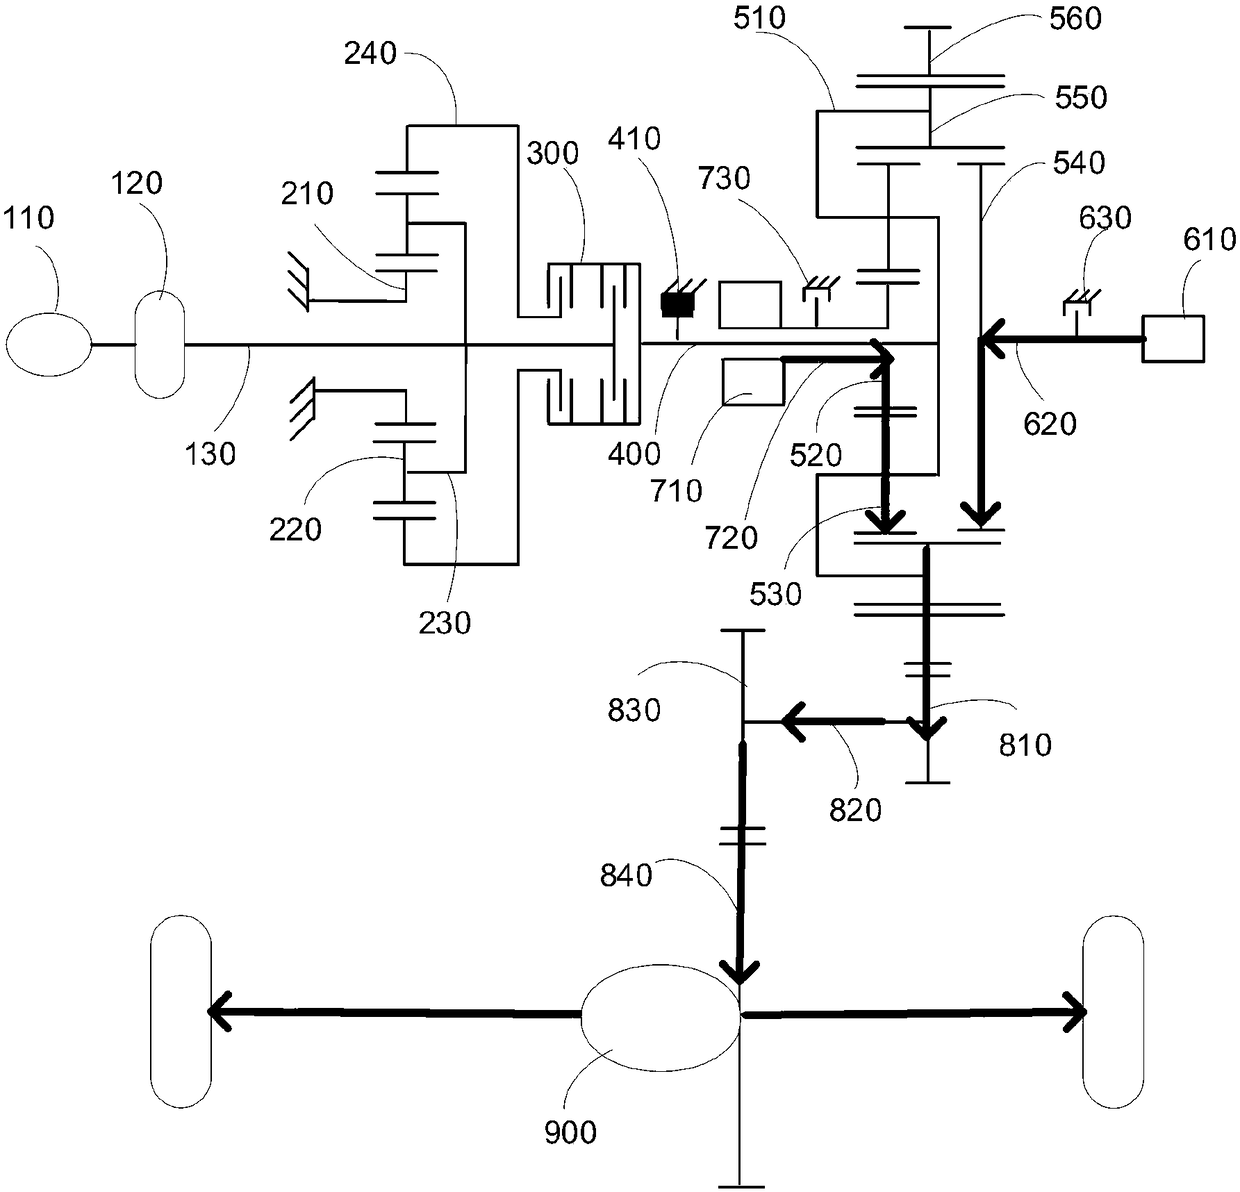 Double-planetary-line hybrid coupling mechanism and motor vehicle